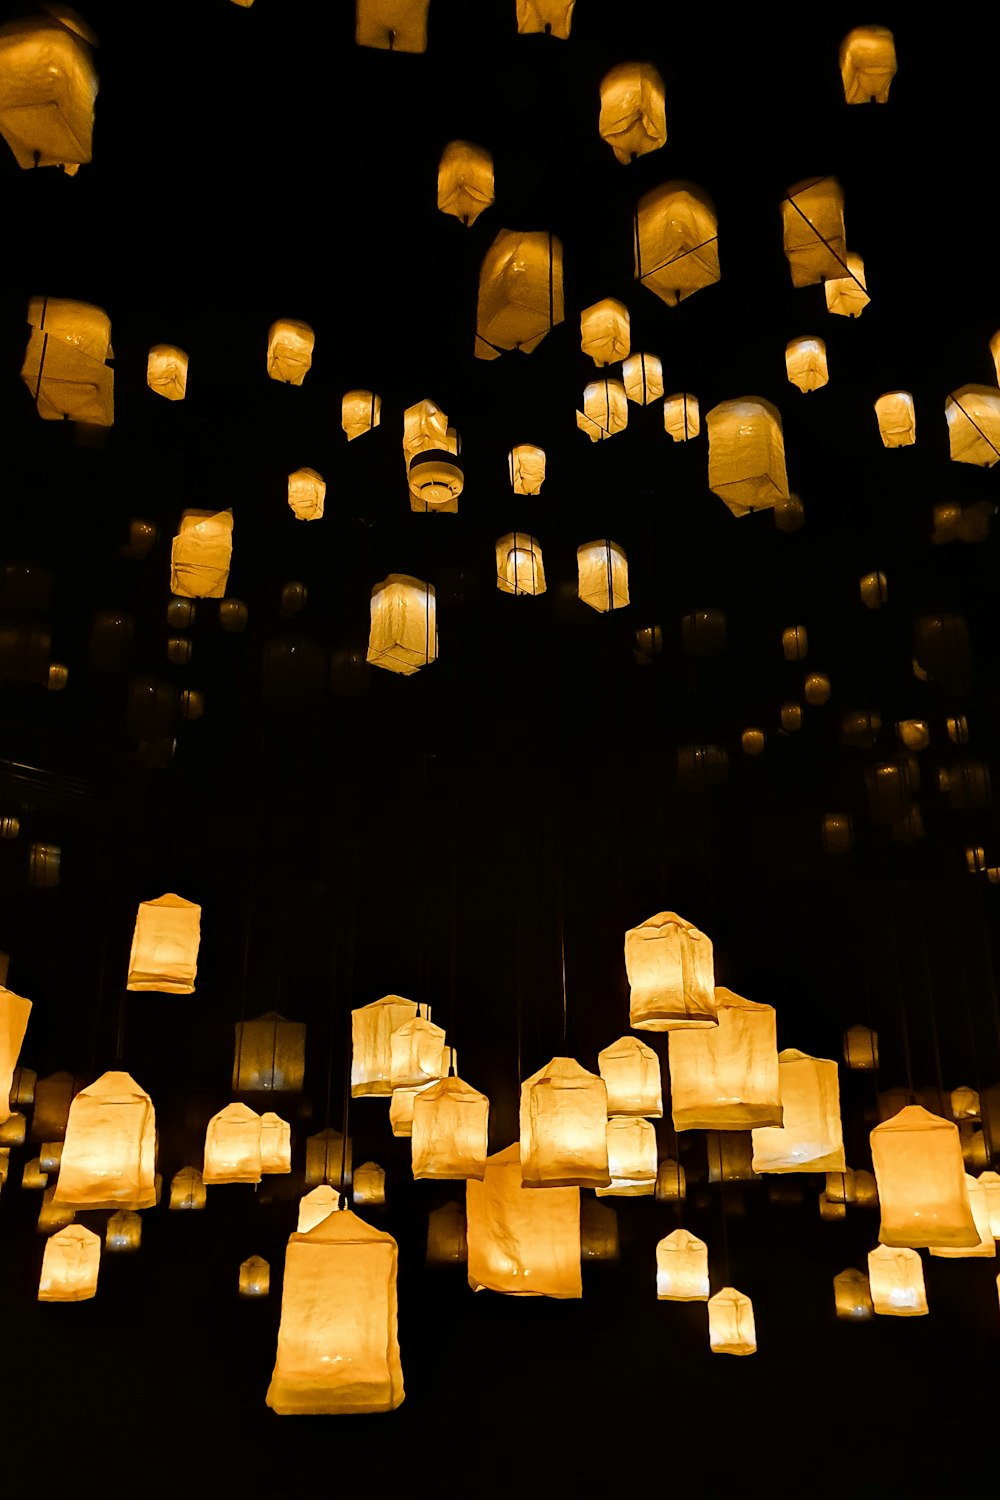 a group of lanterns floating in the air